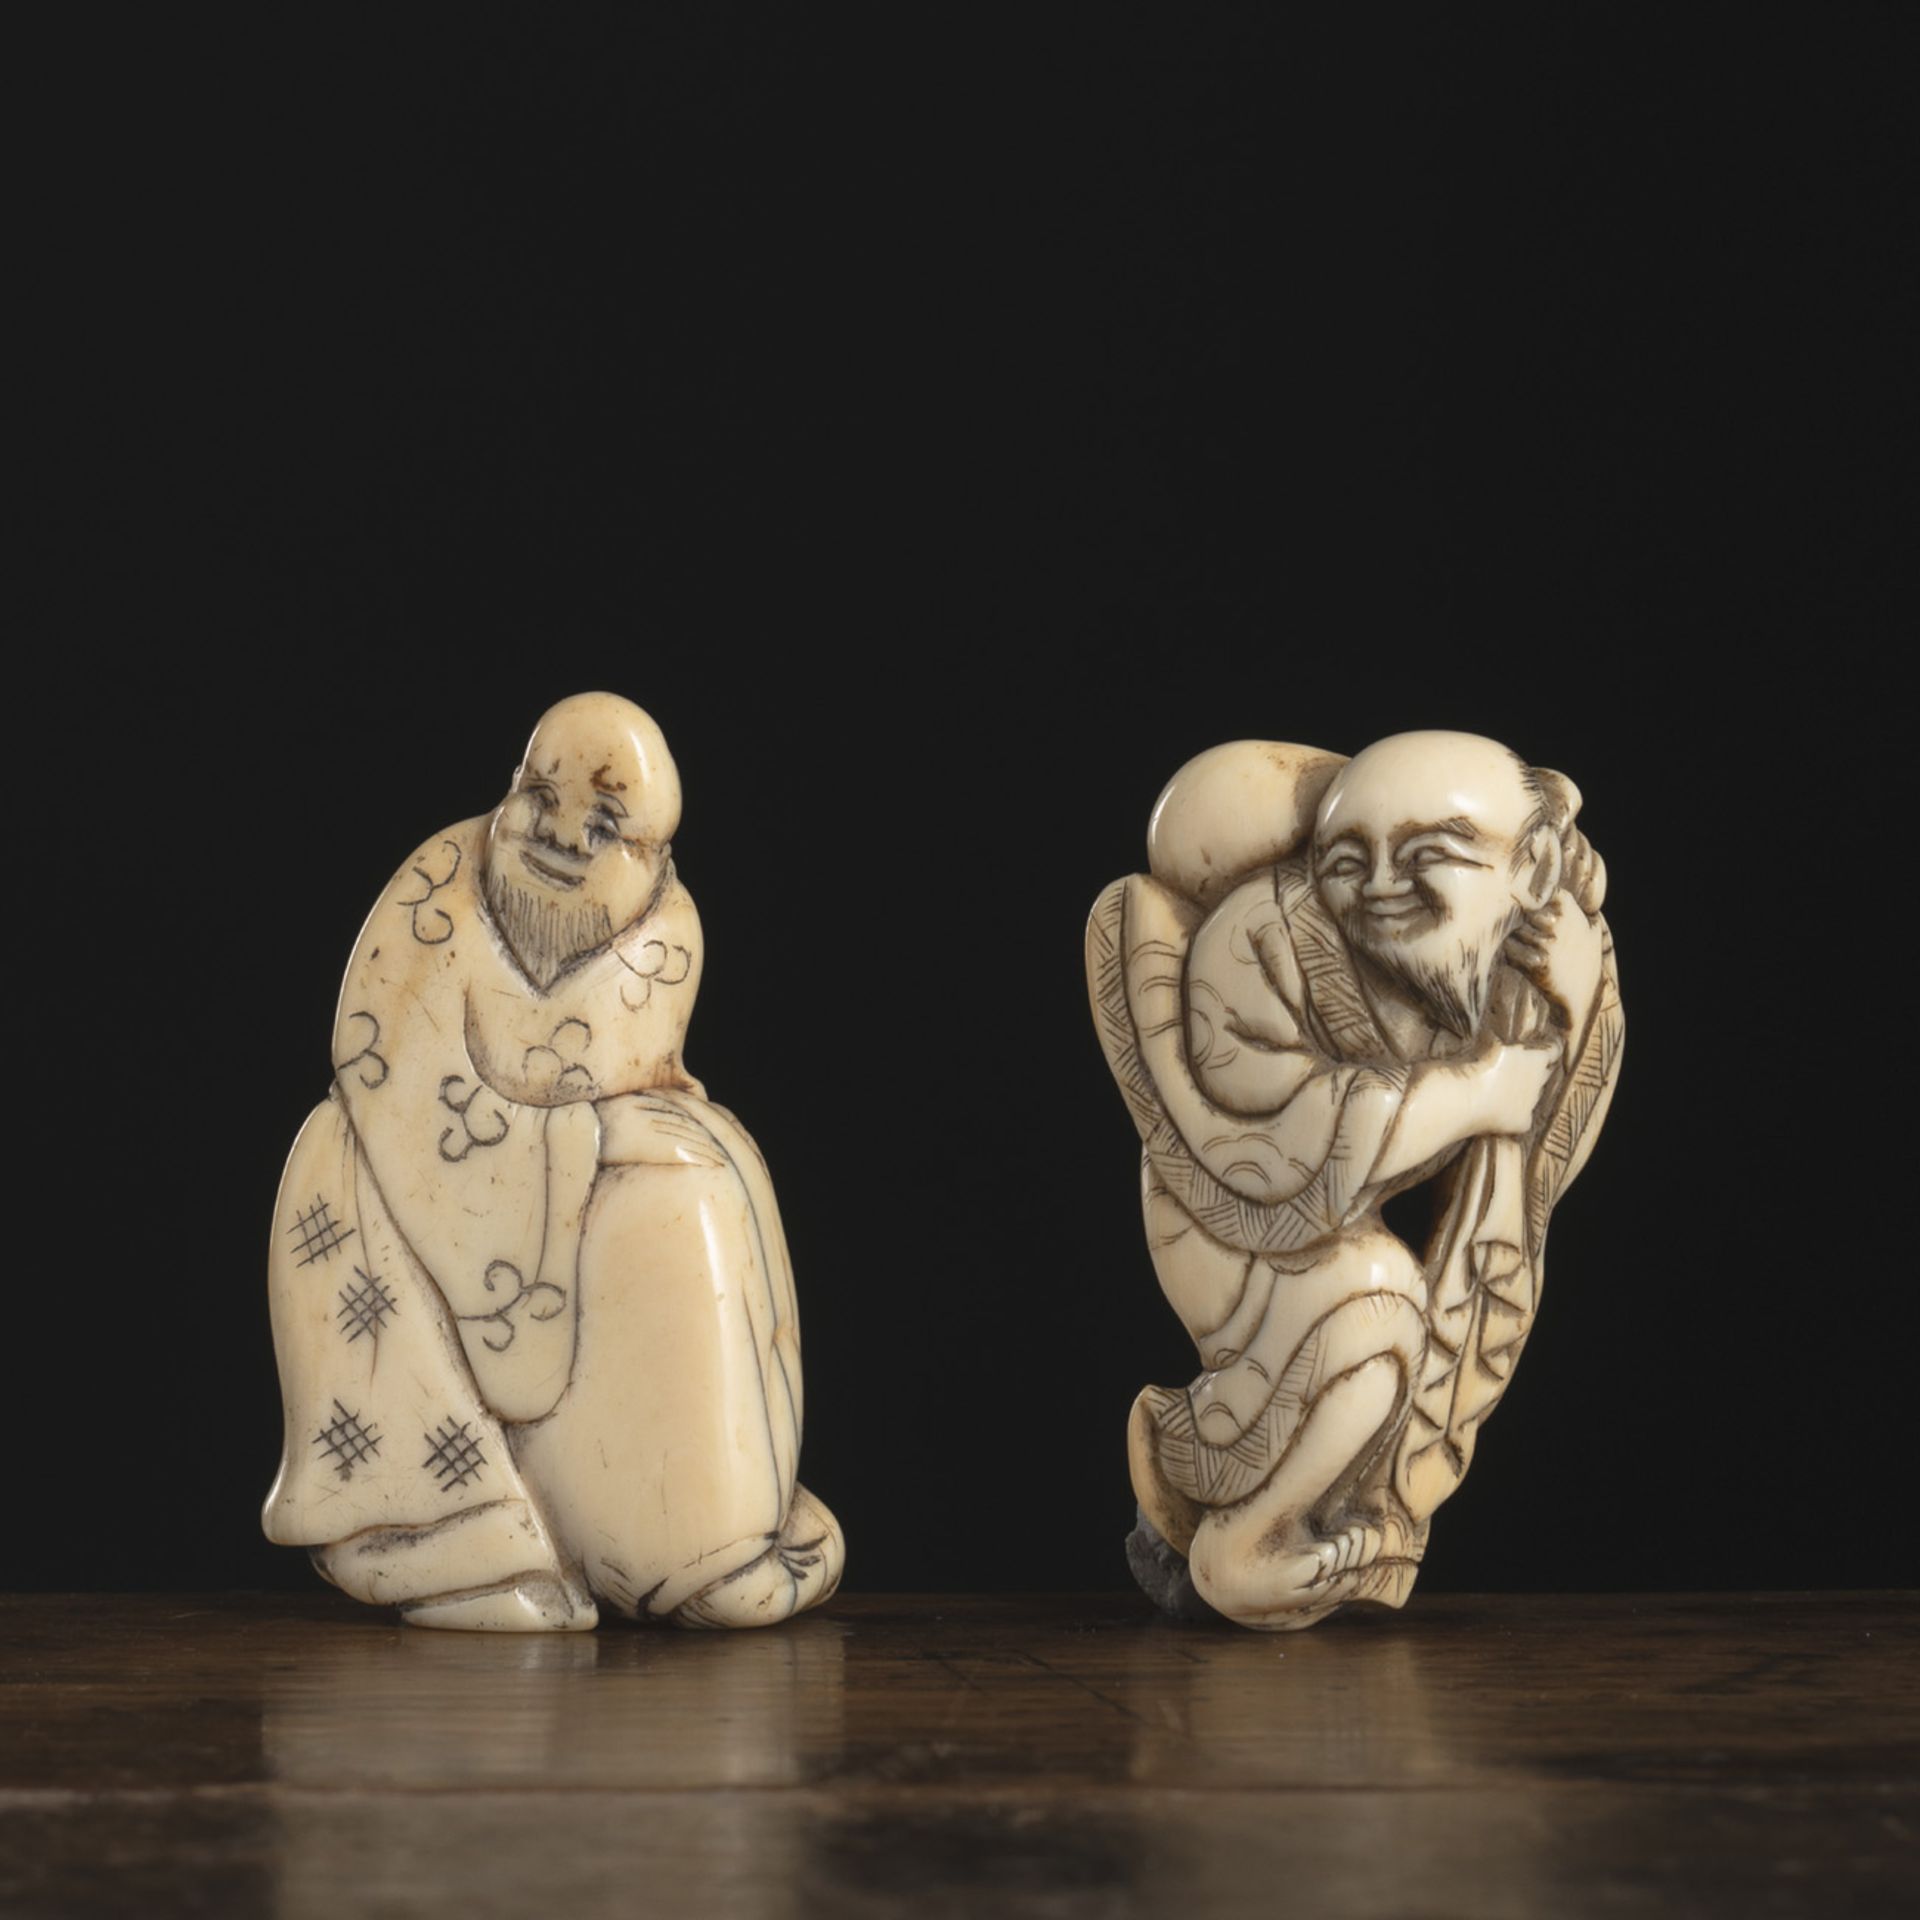 TWO IVORY NETSUKE: SENNIN OR HOTEI WITH A BAG ON HIS SHOULDER AND STANDING CHINESE WITH A LARGE BAG